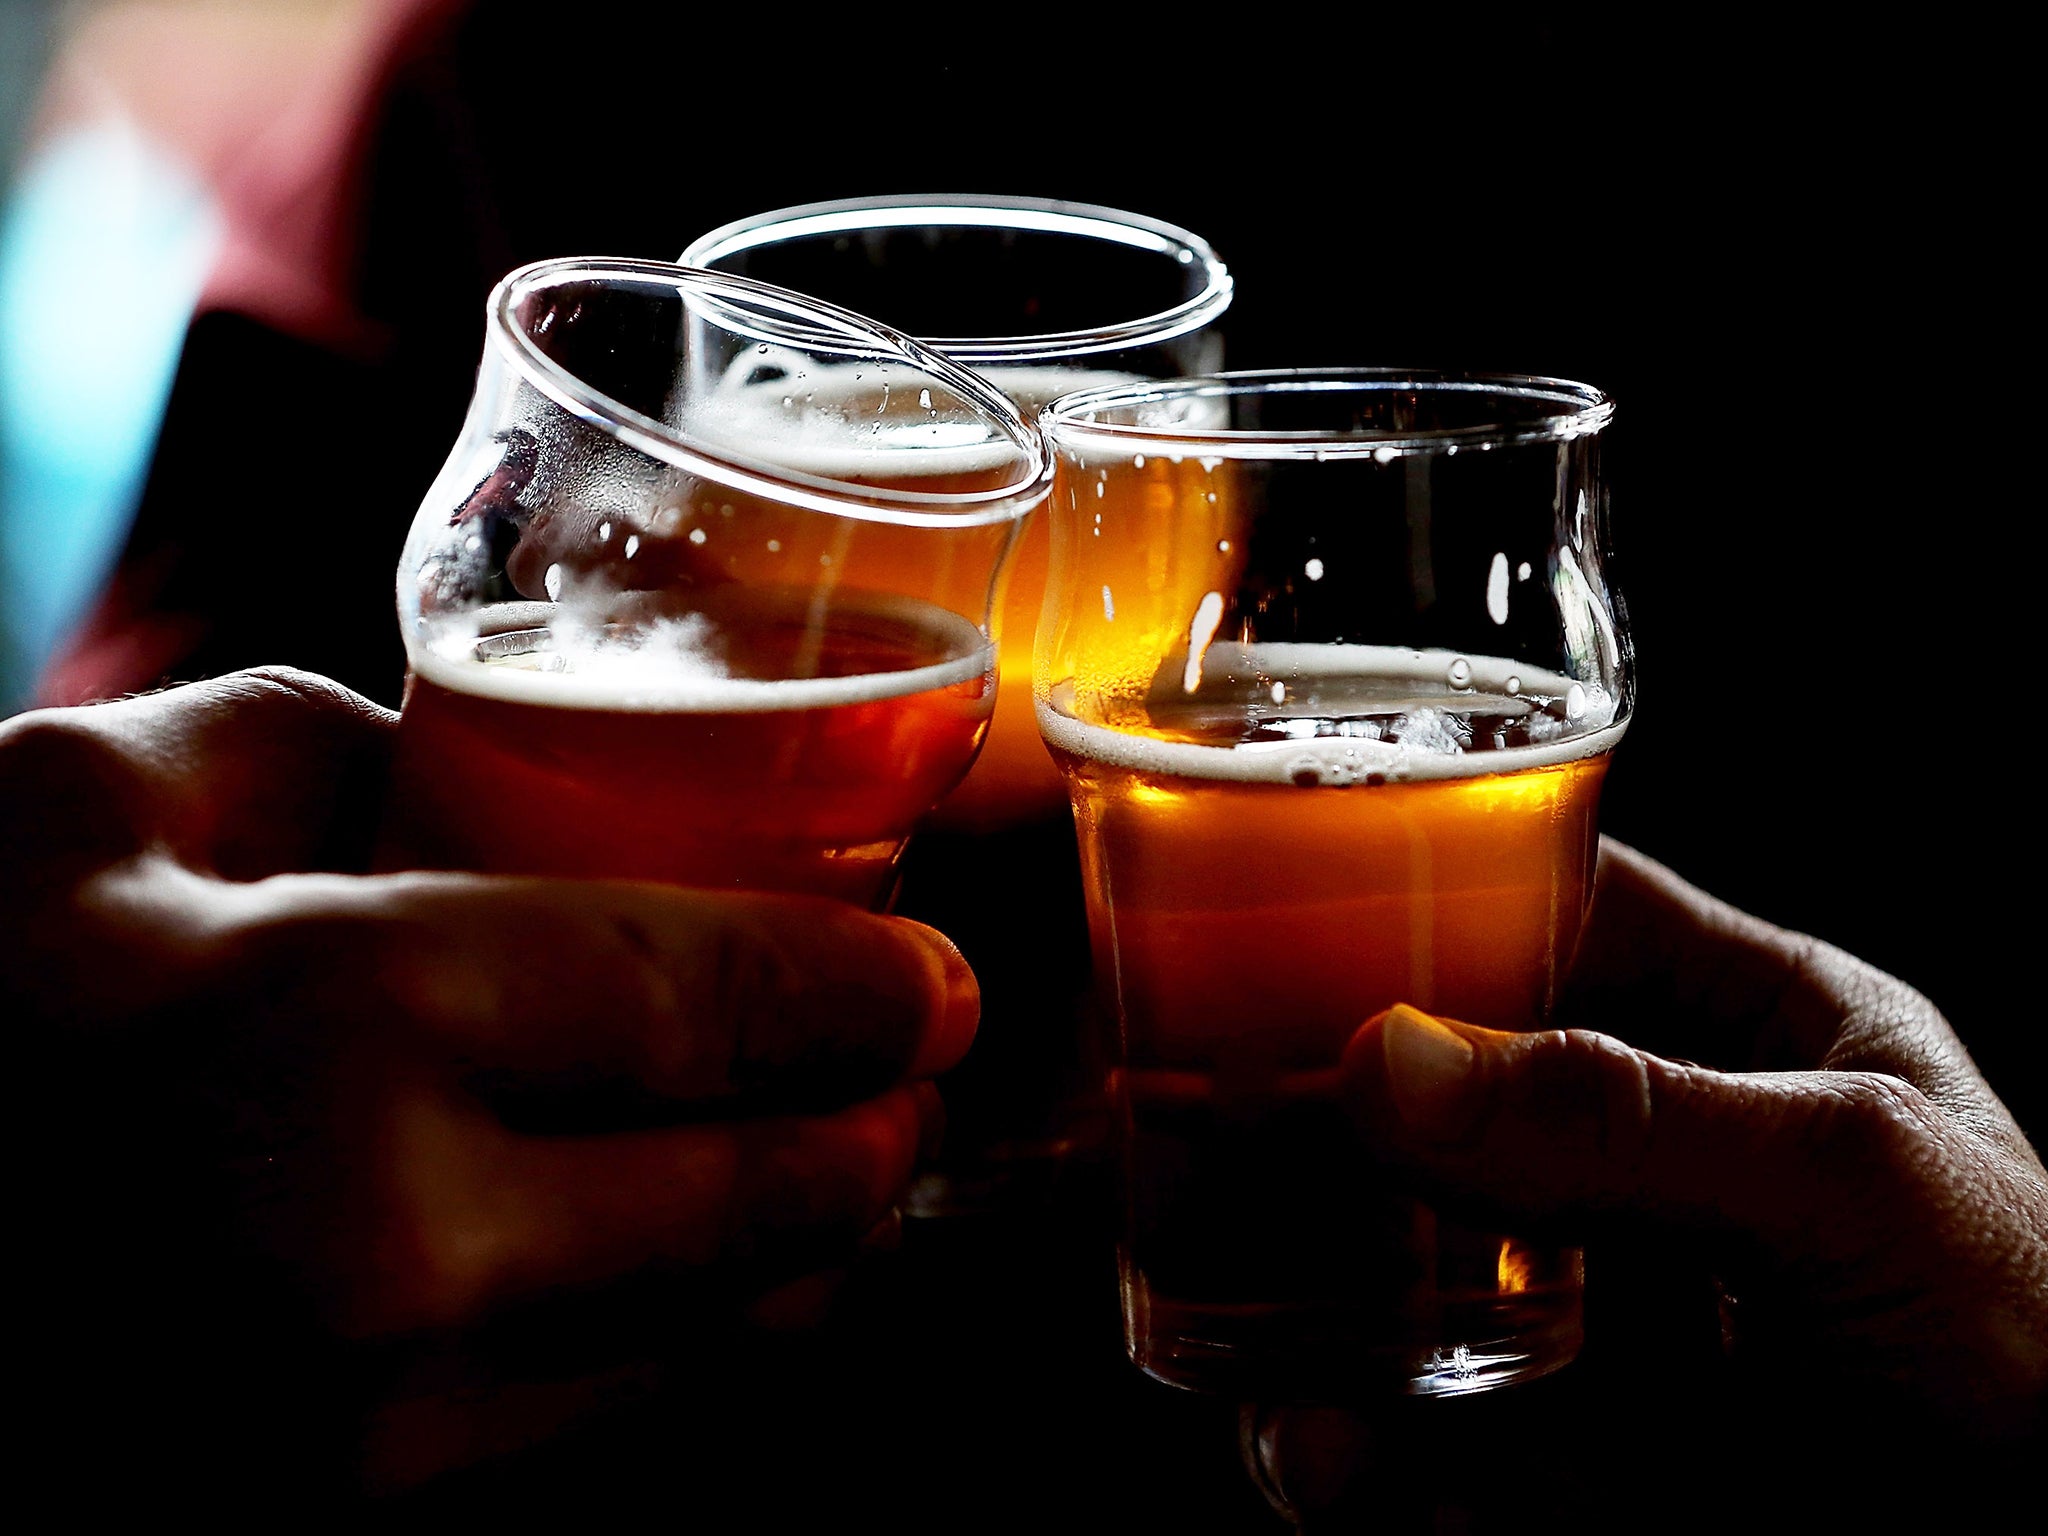 A life-saving pill could help reduce alcohol consumption